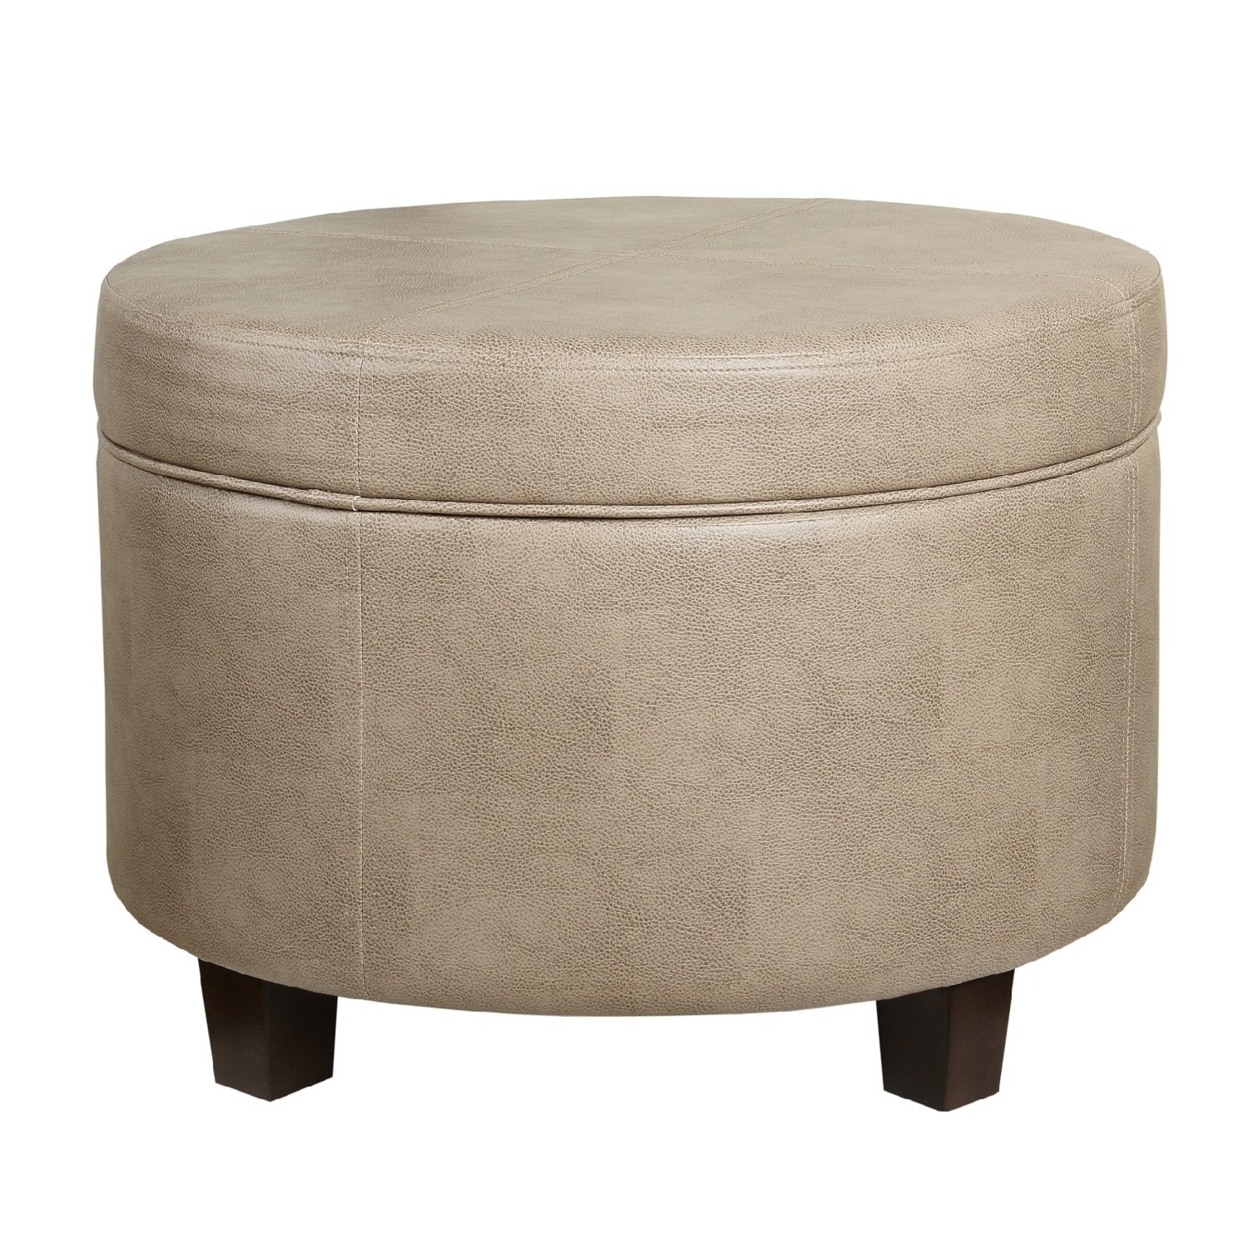 Faux Leather Upholstered Wooden Ottoman With Lift Off Lid Storage, Brown- Saltoro Sherpi